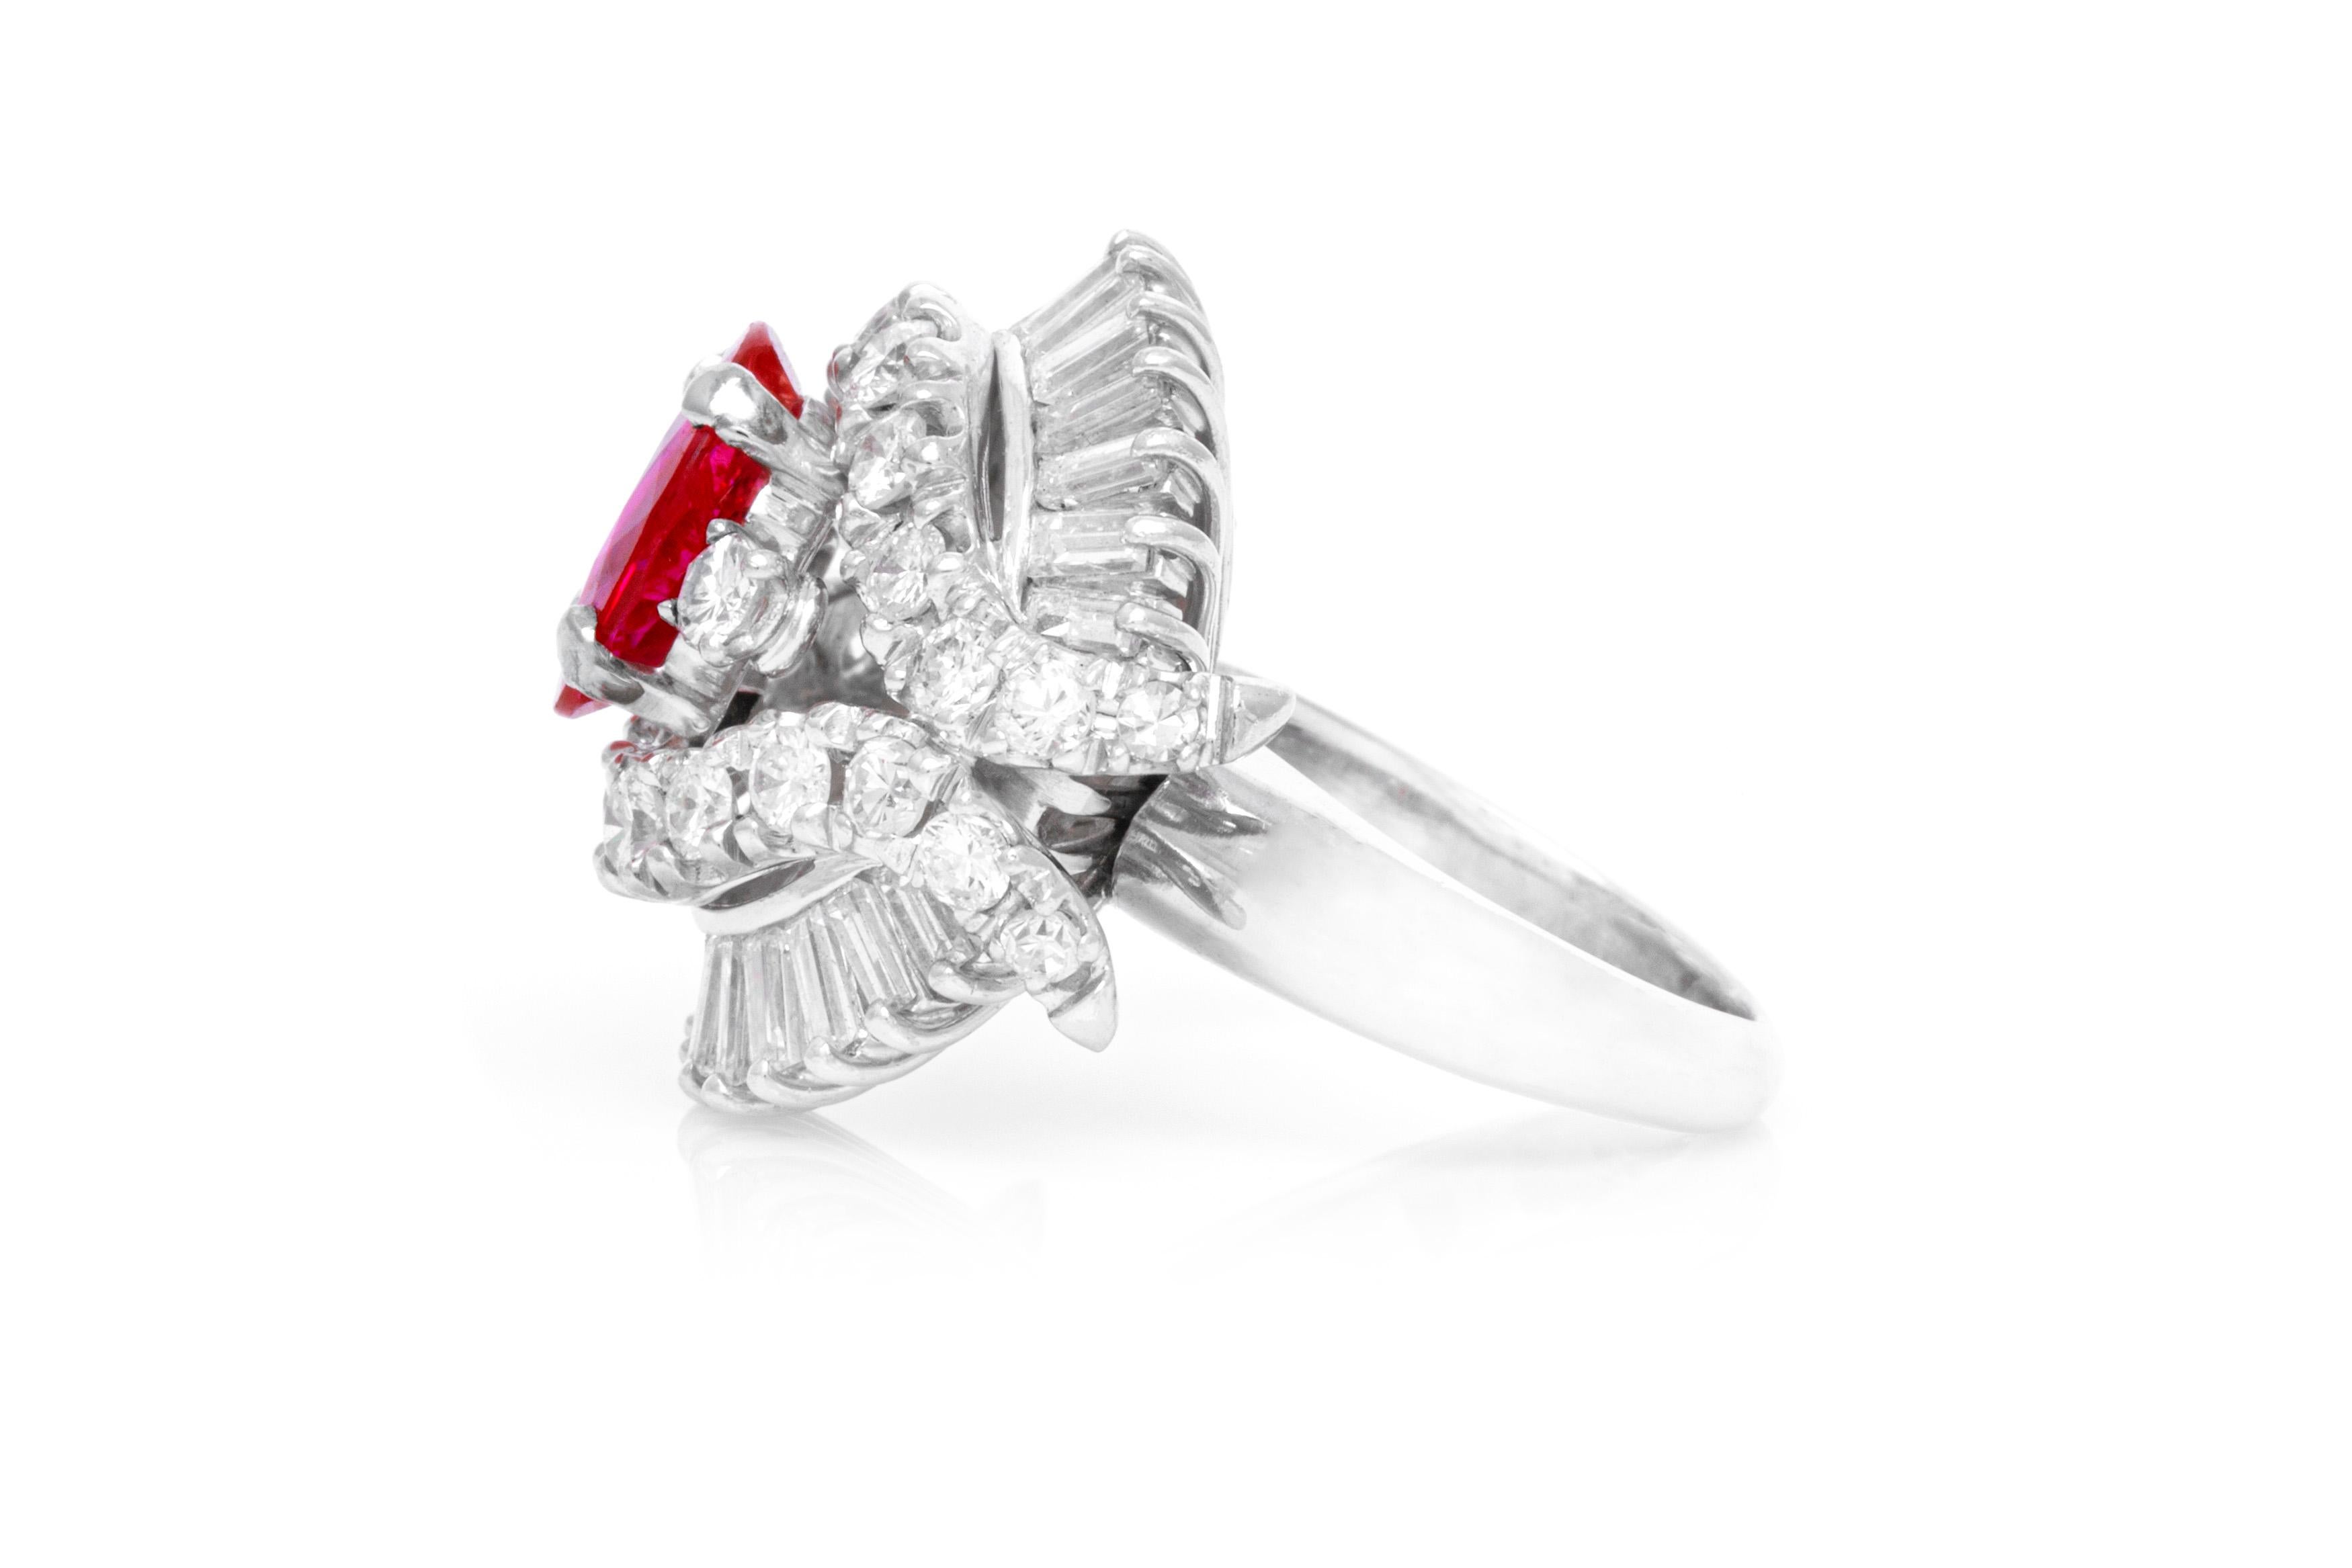 Cocktail ring finely crafted in Platinum with Burma Ruby in the center weighing approximately 2.00 carat, and diamonds surrounding the ruby weighing approximately 2.68 carat.
The ring is size 4.5 US and 48 EU.
Circa 1950's.
